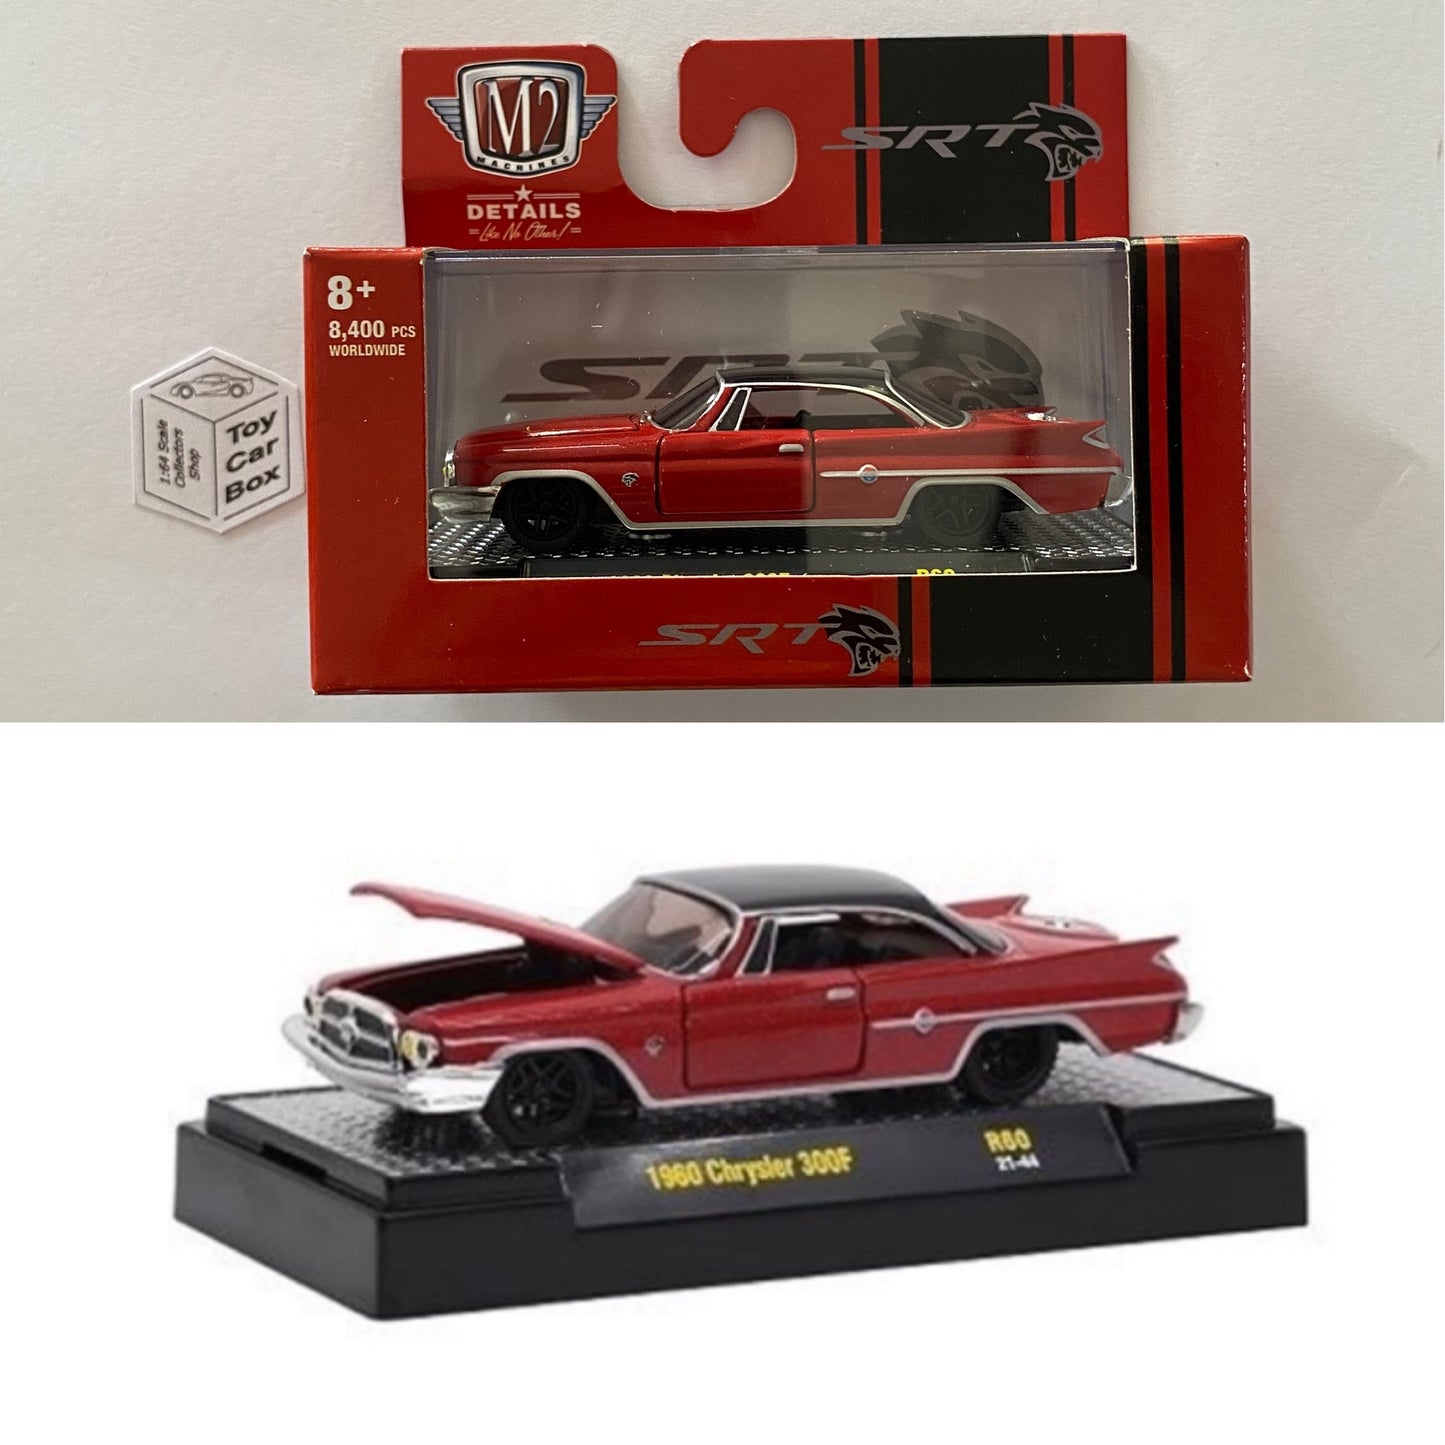 M2 MACHINES - 1960 Chrysler 300F (Red - Auto Muscle Gassers - 1/64 Scale) L05